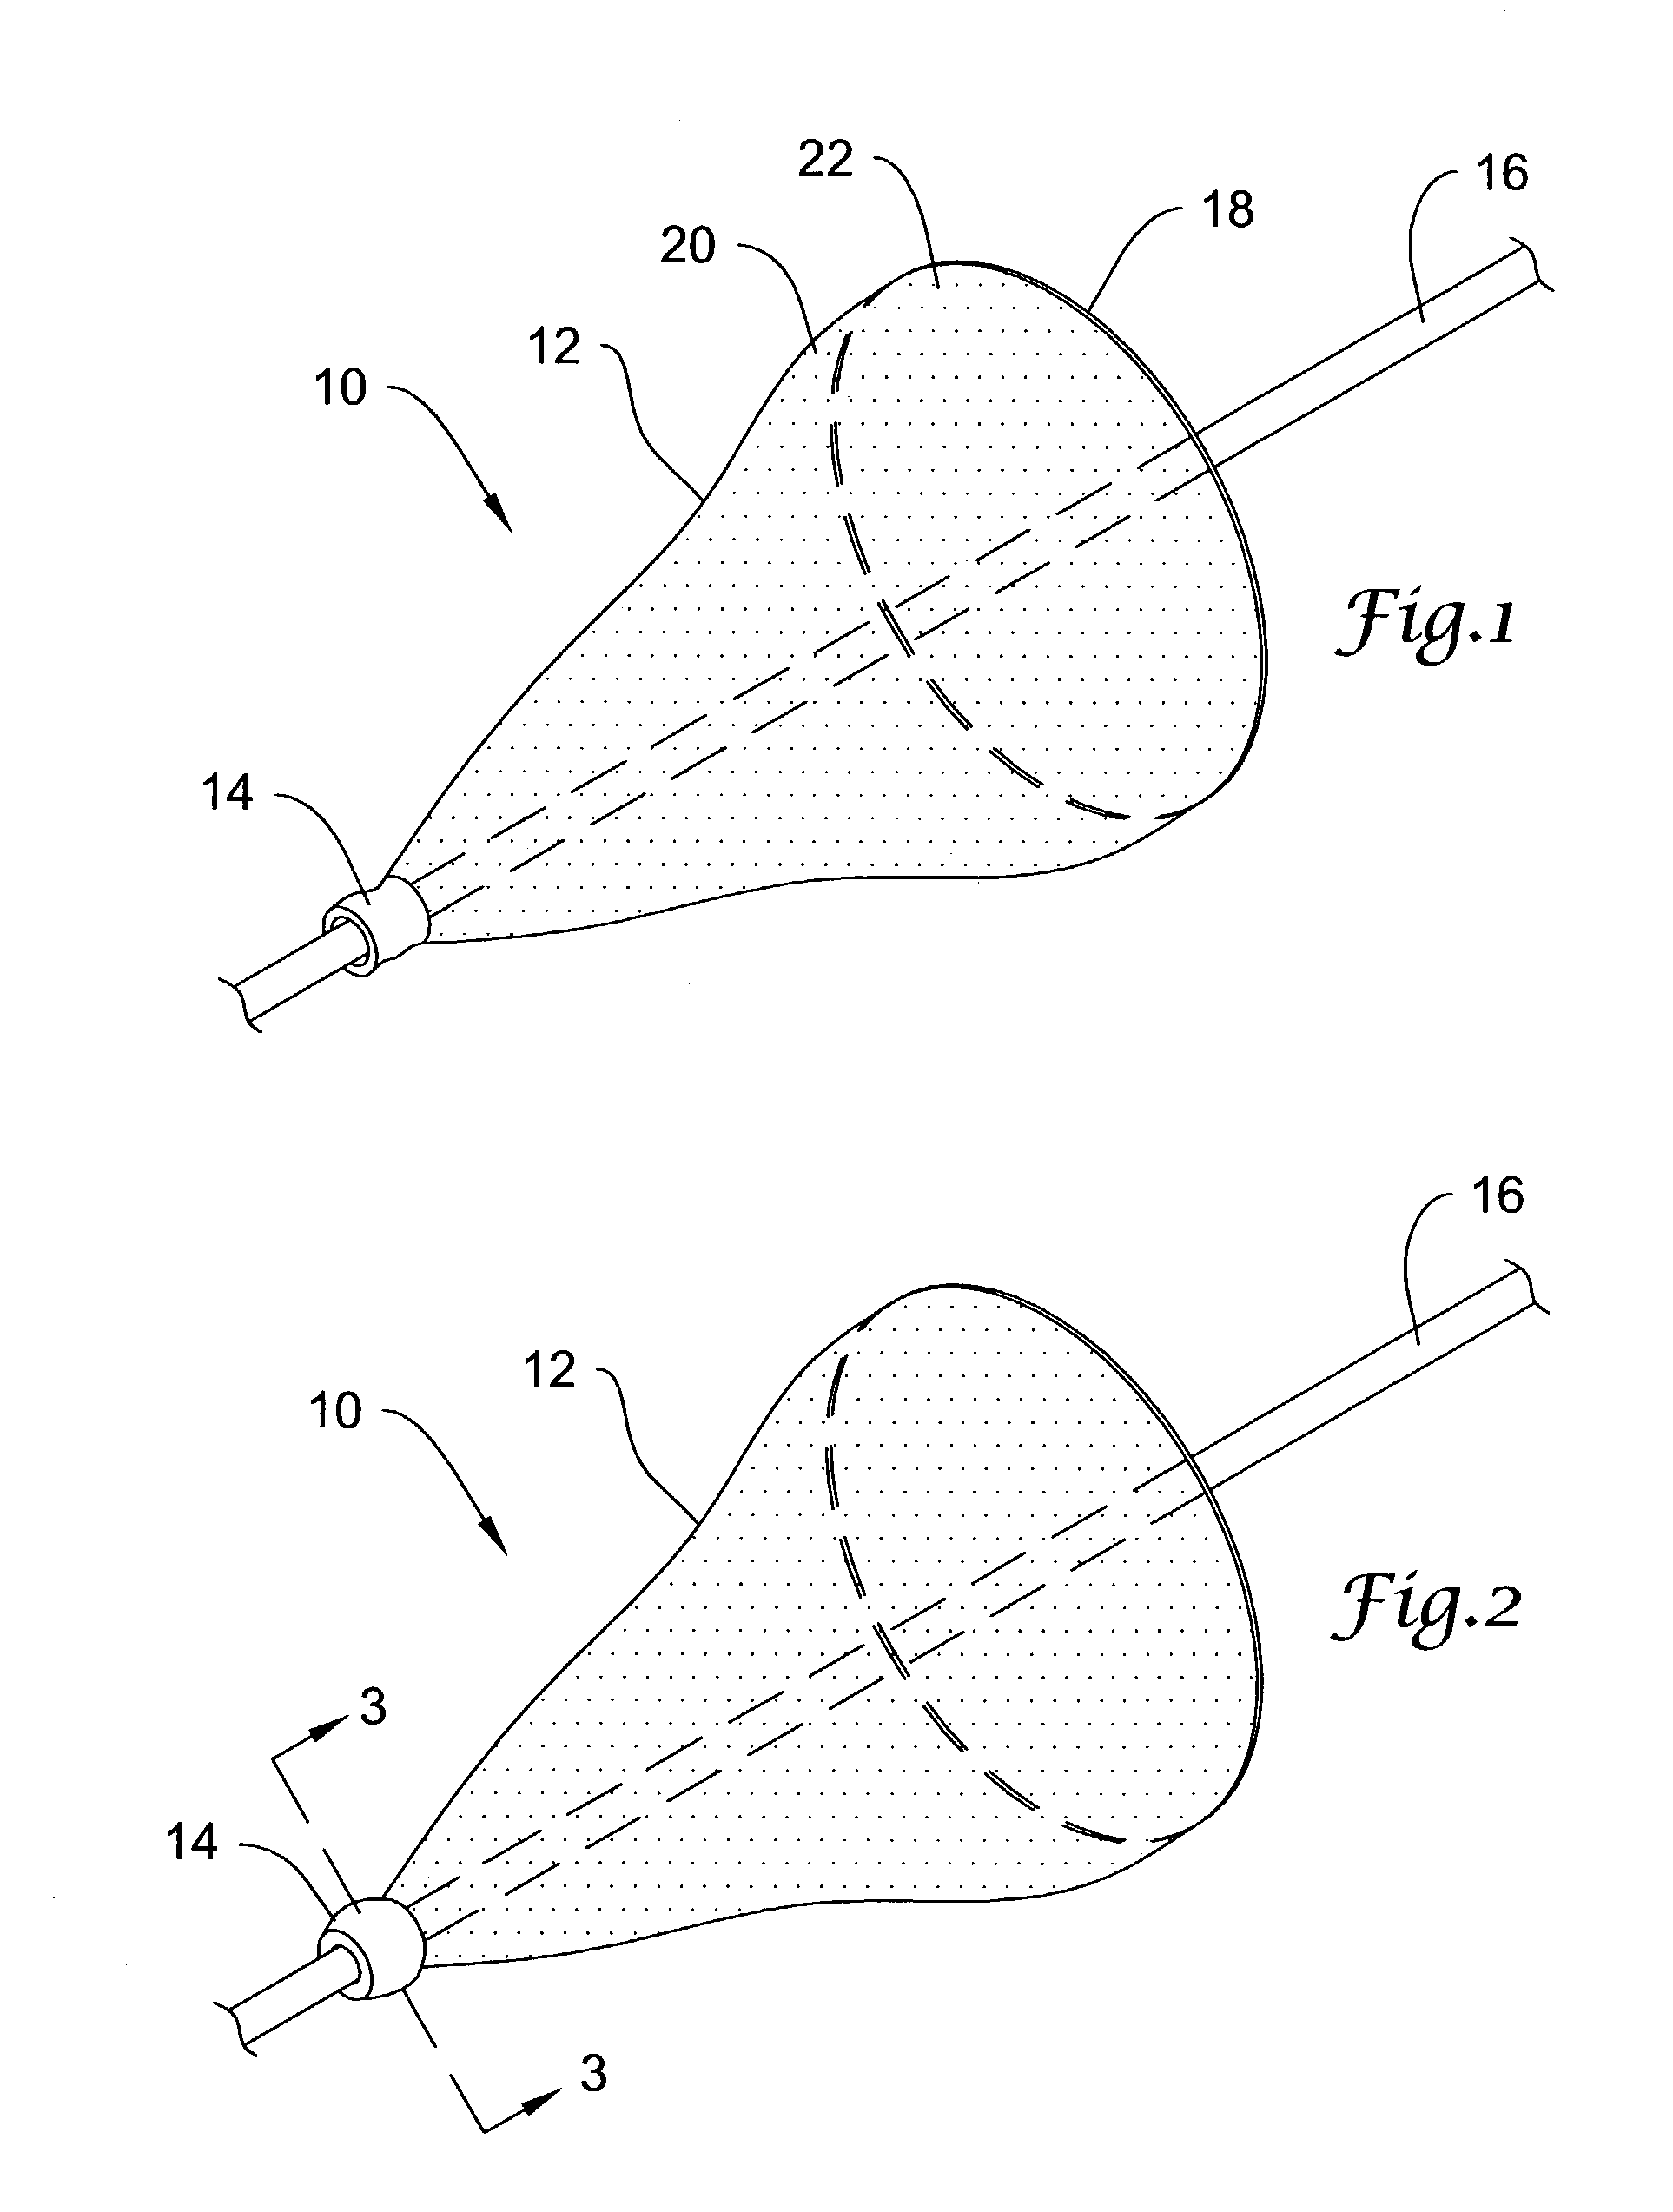 Multi-wire embolic protection filtering device